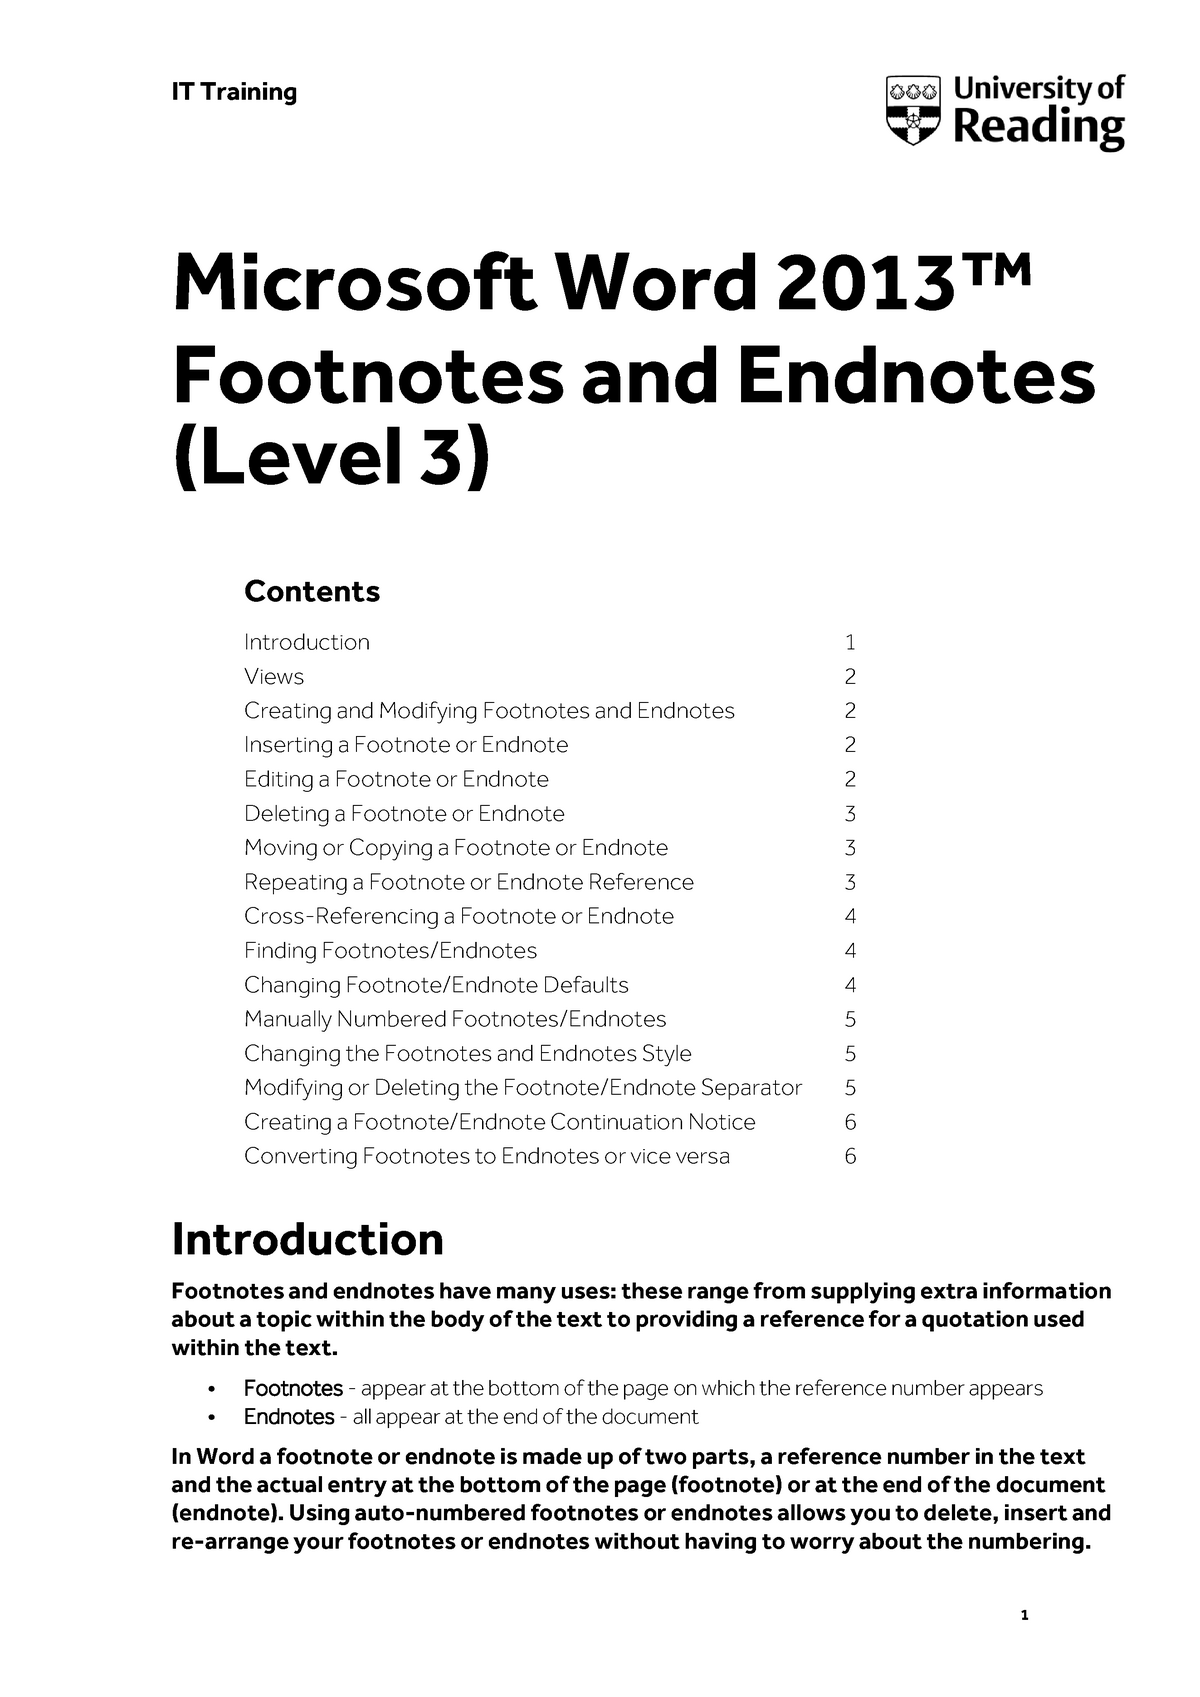 how to do endnotes in word 2013